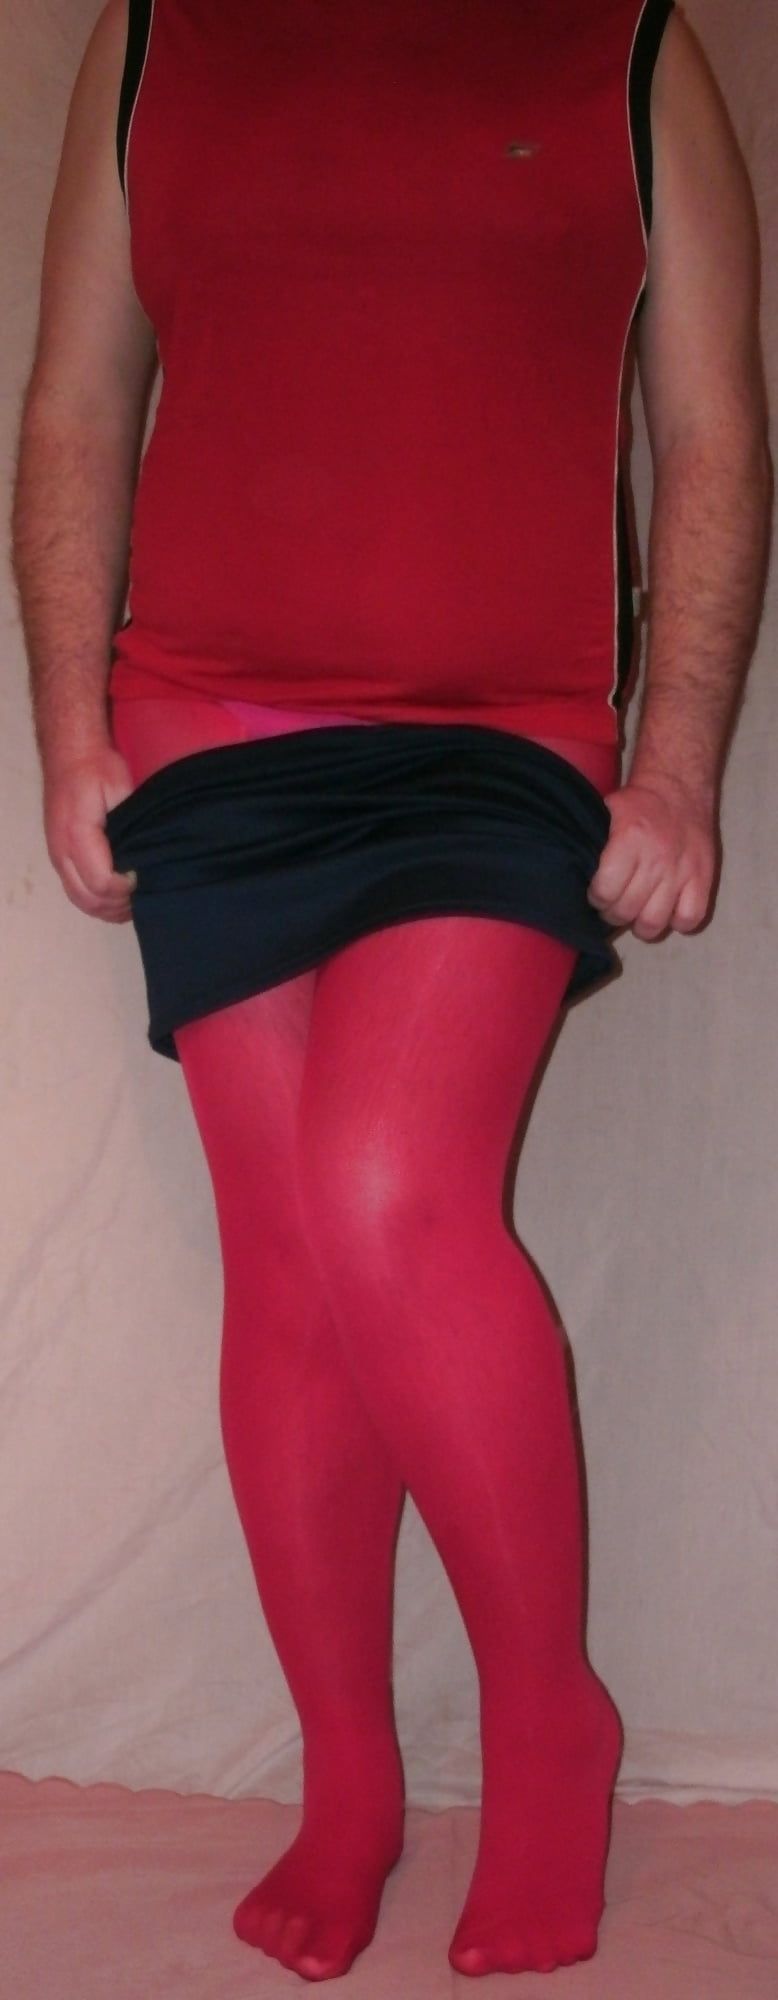 Red stockings #30